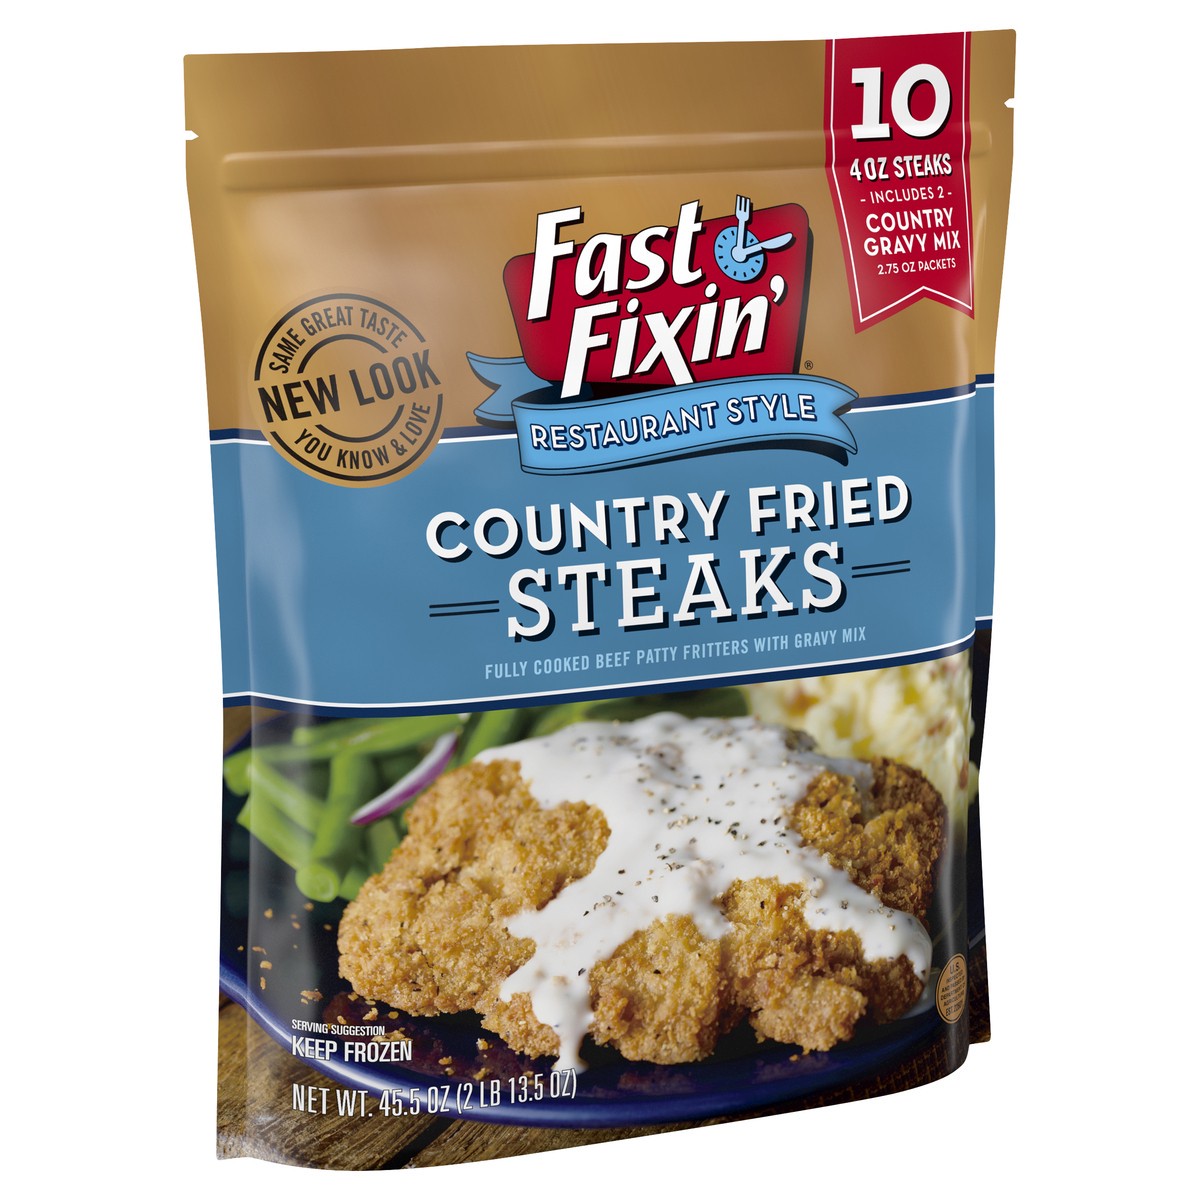 slide 1 of 8, Fast Fixin Restaurant Style Mixed Species Meat/Poultry/Other Animal, 546.08 oz